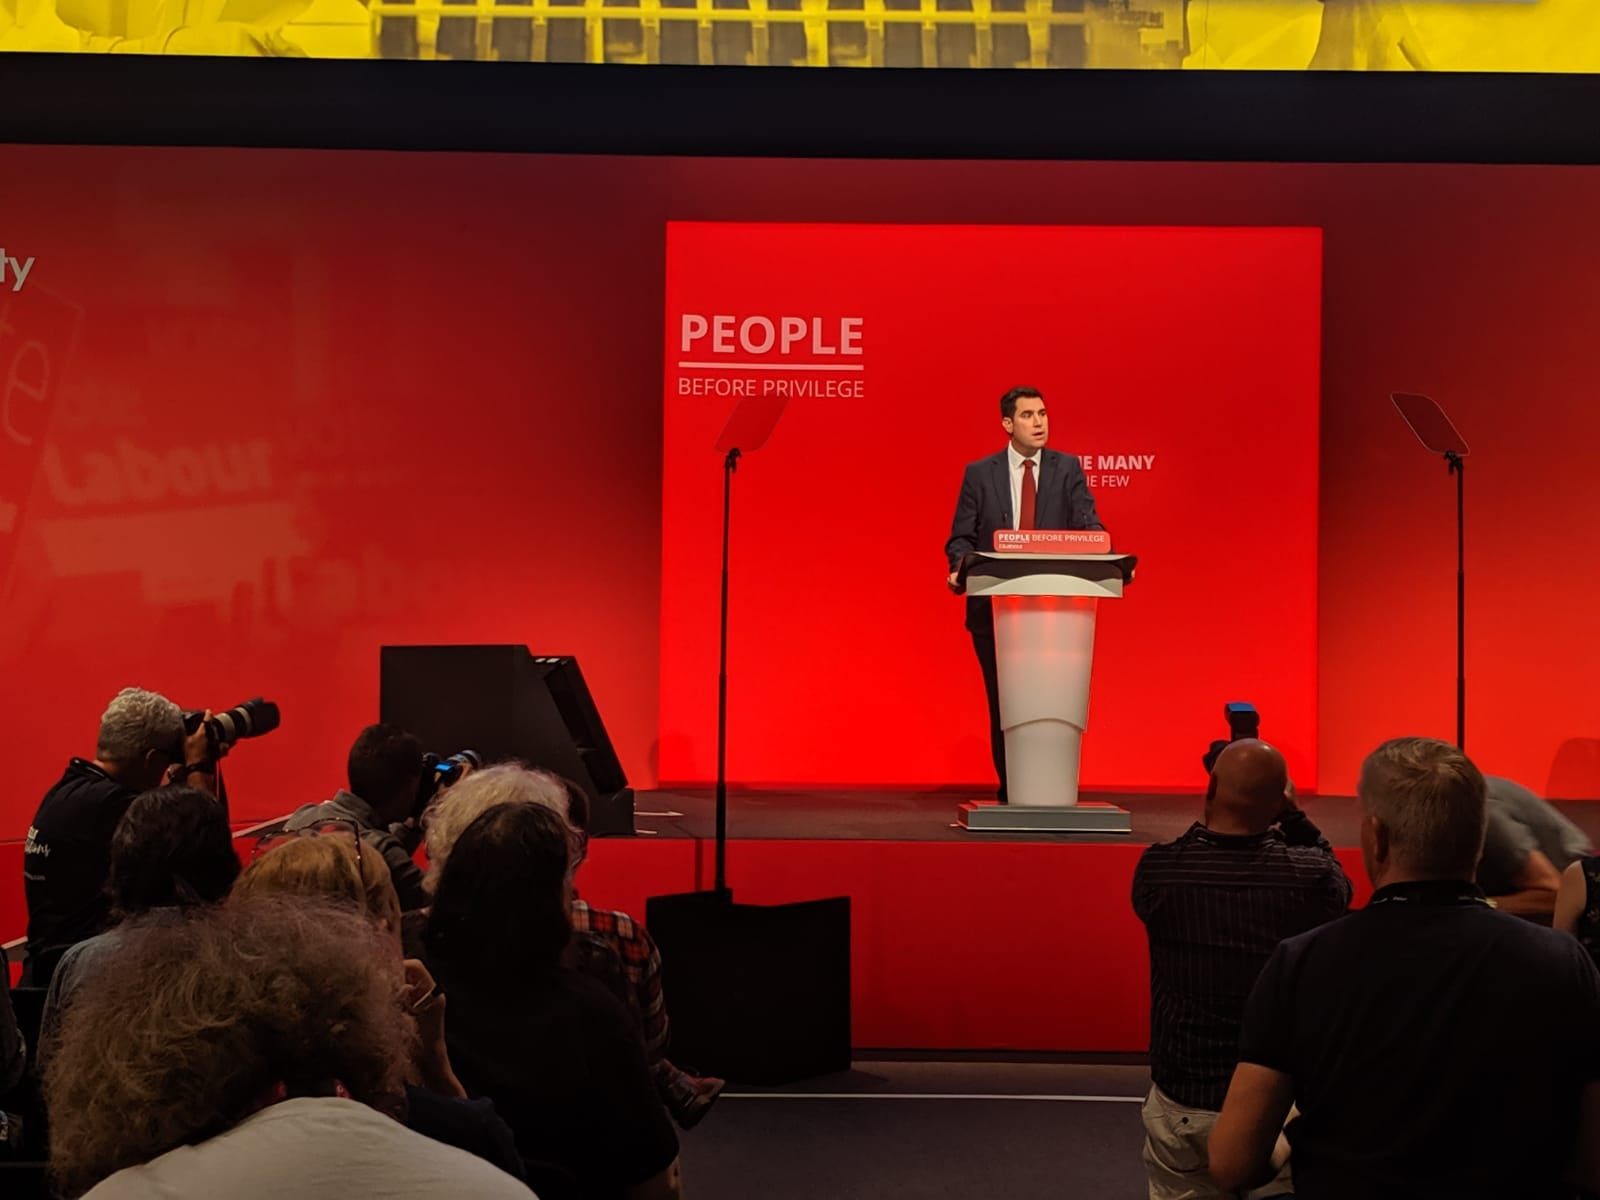  Richard Burgon, this photo is licensed under a Creative Commons Attribution 4.0 License, meaning it can be used freely with attribution.